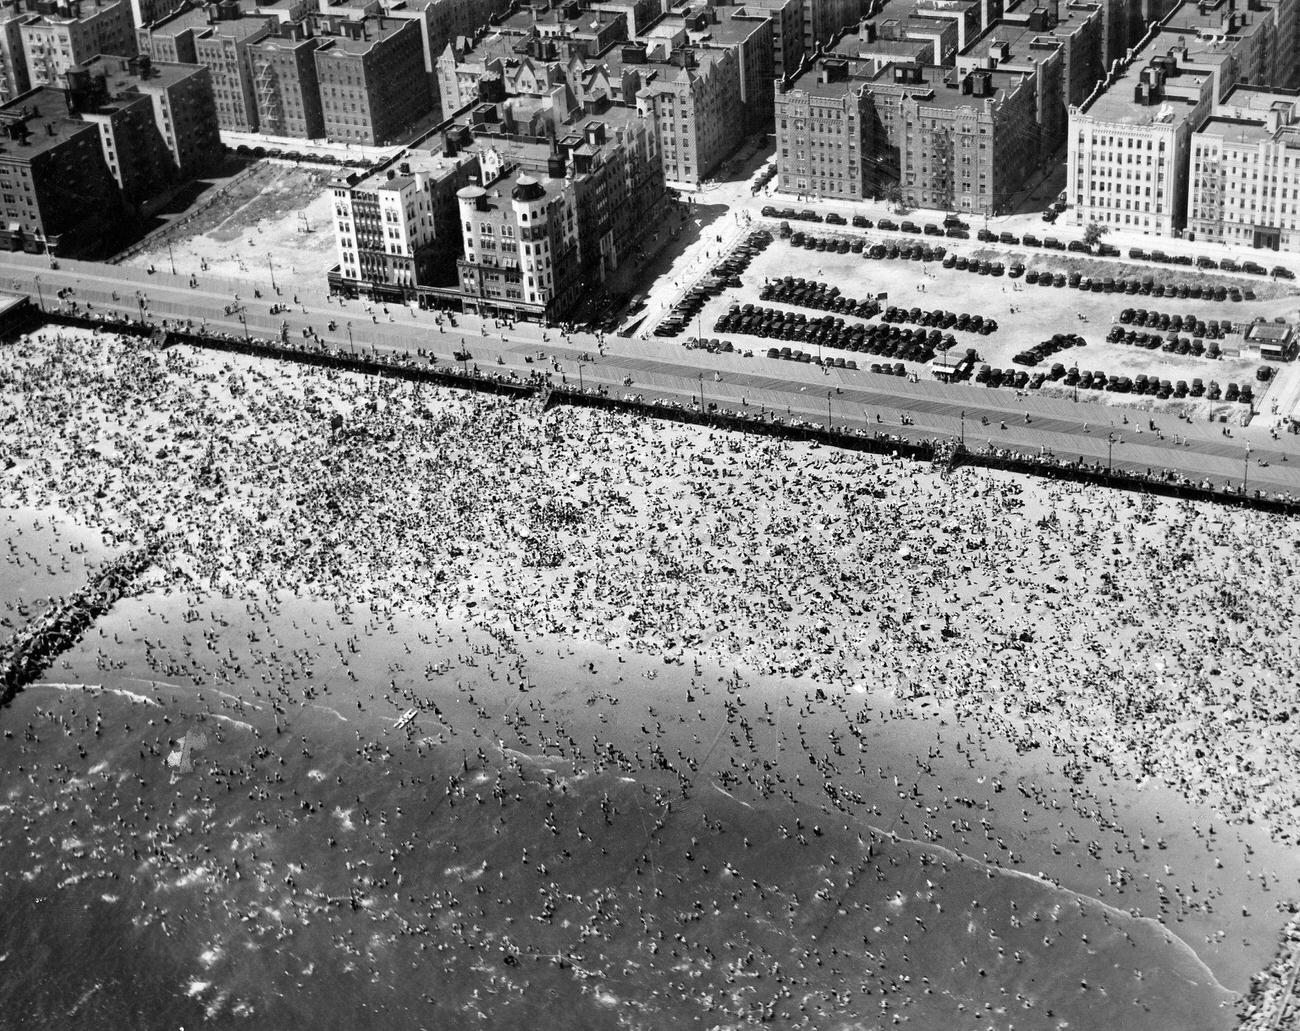 Coney Island Beach Packed During Heat Wave, July 18, 1936